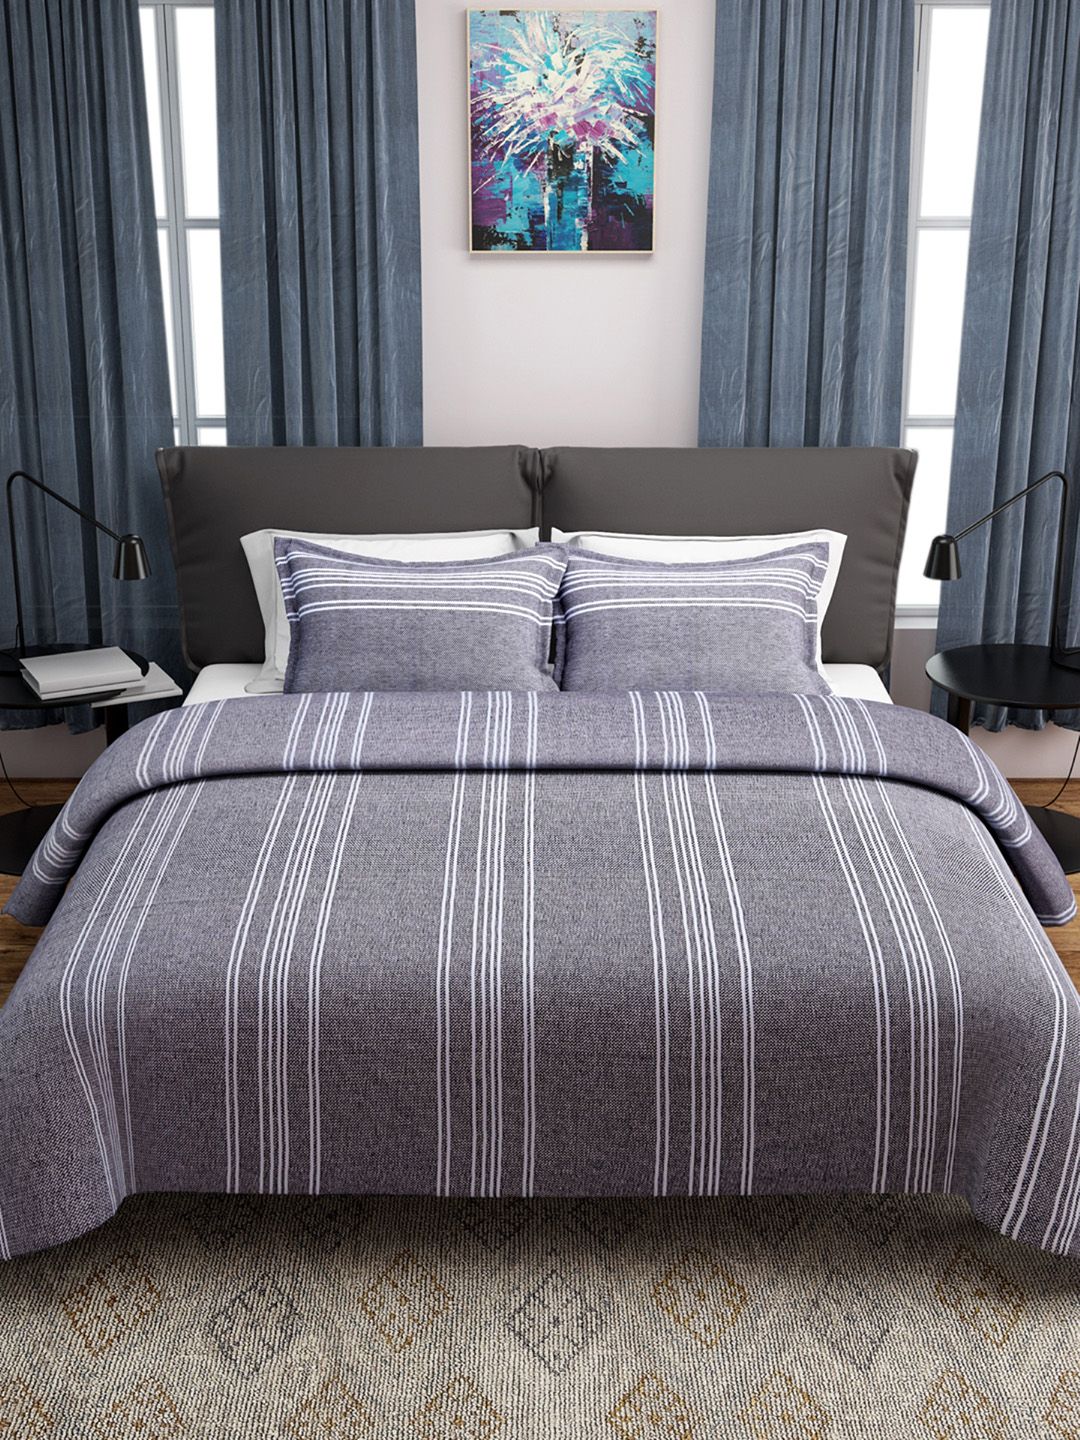 ROMEE Grey & White Woven Design 150 TC Cotton Bed Cover with 2 Pillow Covers Price in India